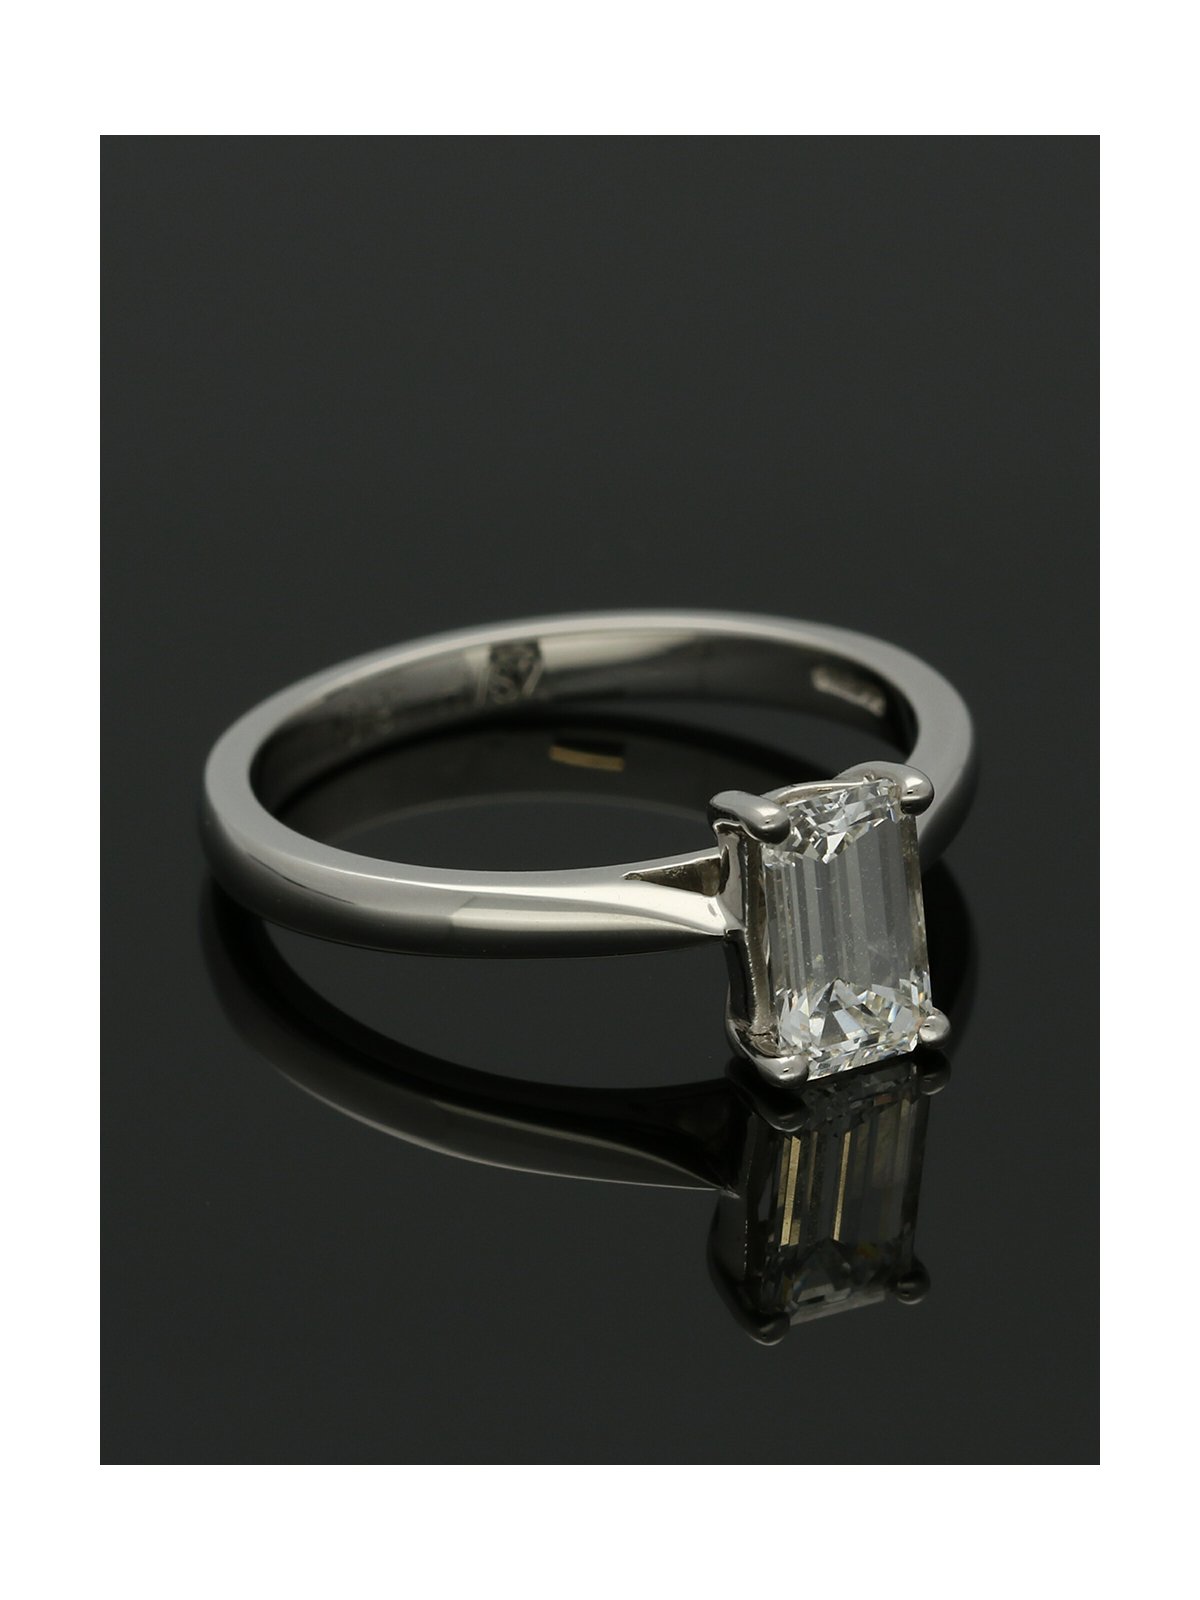 Diamond Solitaire Engagement Ring "The Zara Collection" Certificated 0.90ct Emerald Cut in Platinum